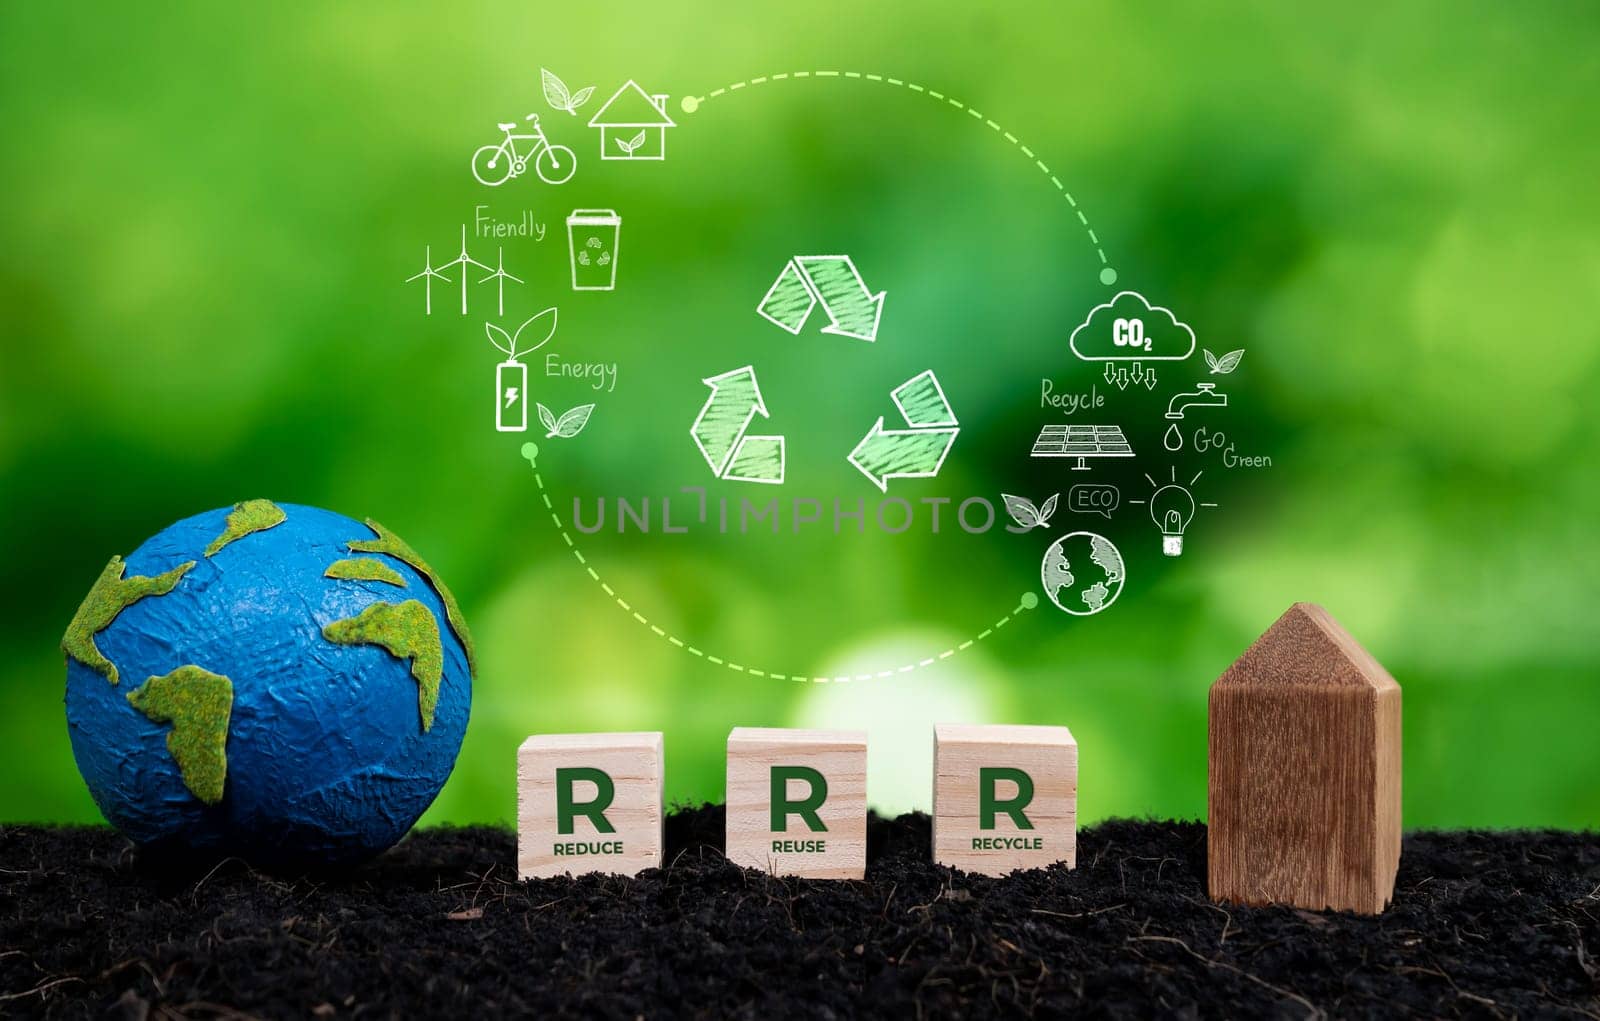 Eco friendly green business company commitment to RRR recycle reduce reuse practices for environmental sustainability with clean and recycled waste management for environment protection. Reliance